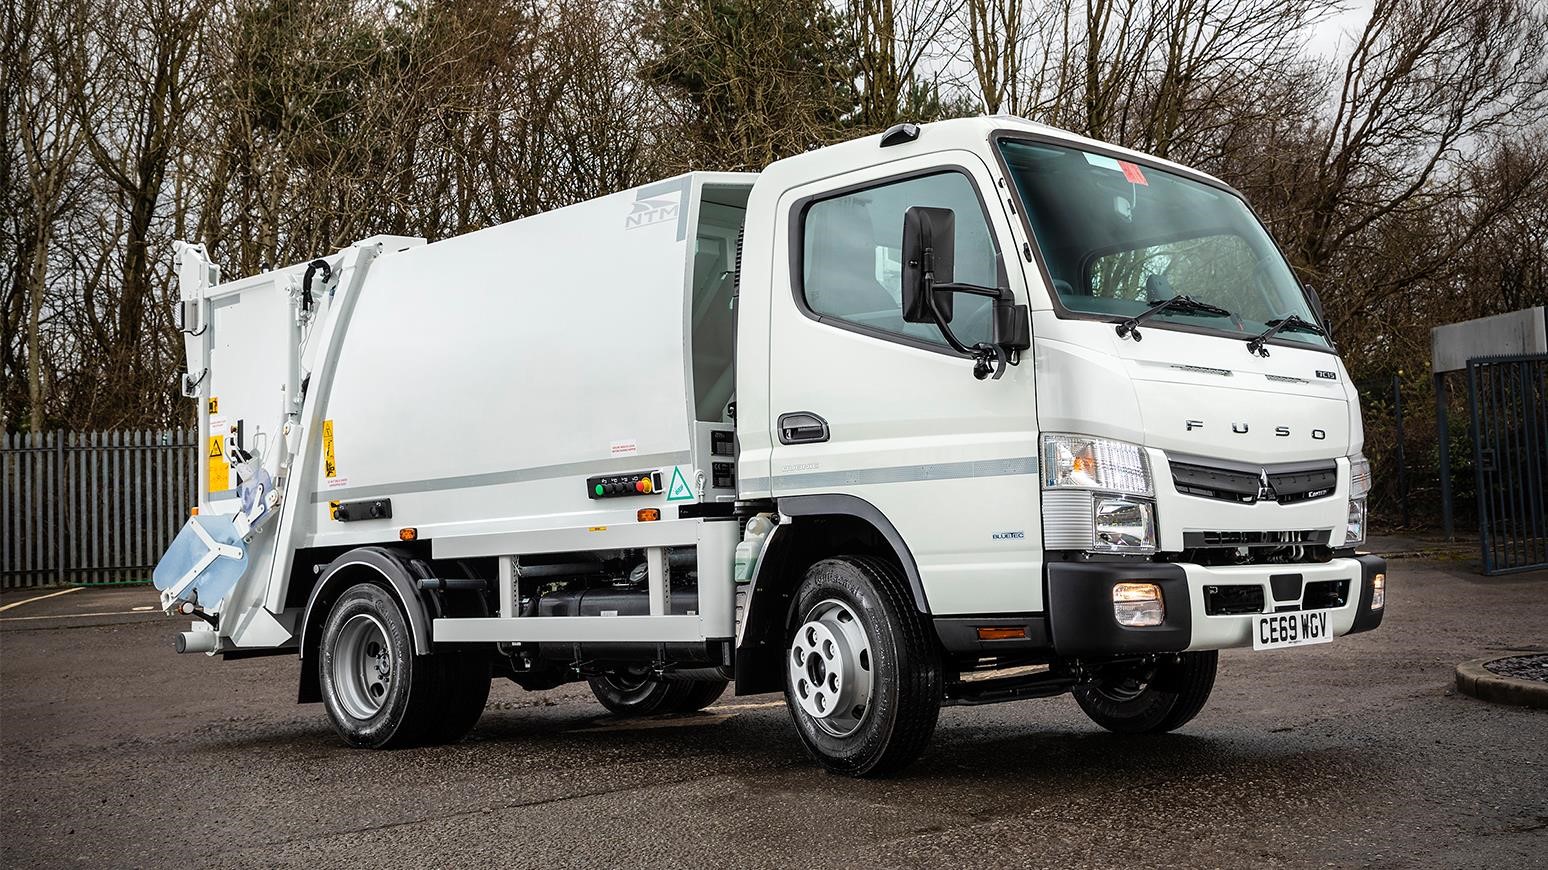 Small Footprint & High Payload Make Customised FUSO Canters Popular For Refuse Collection